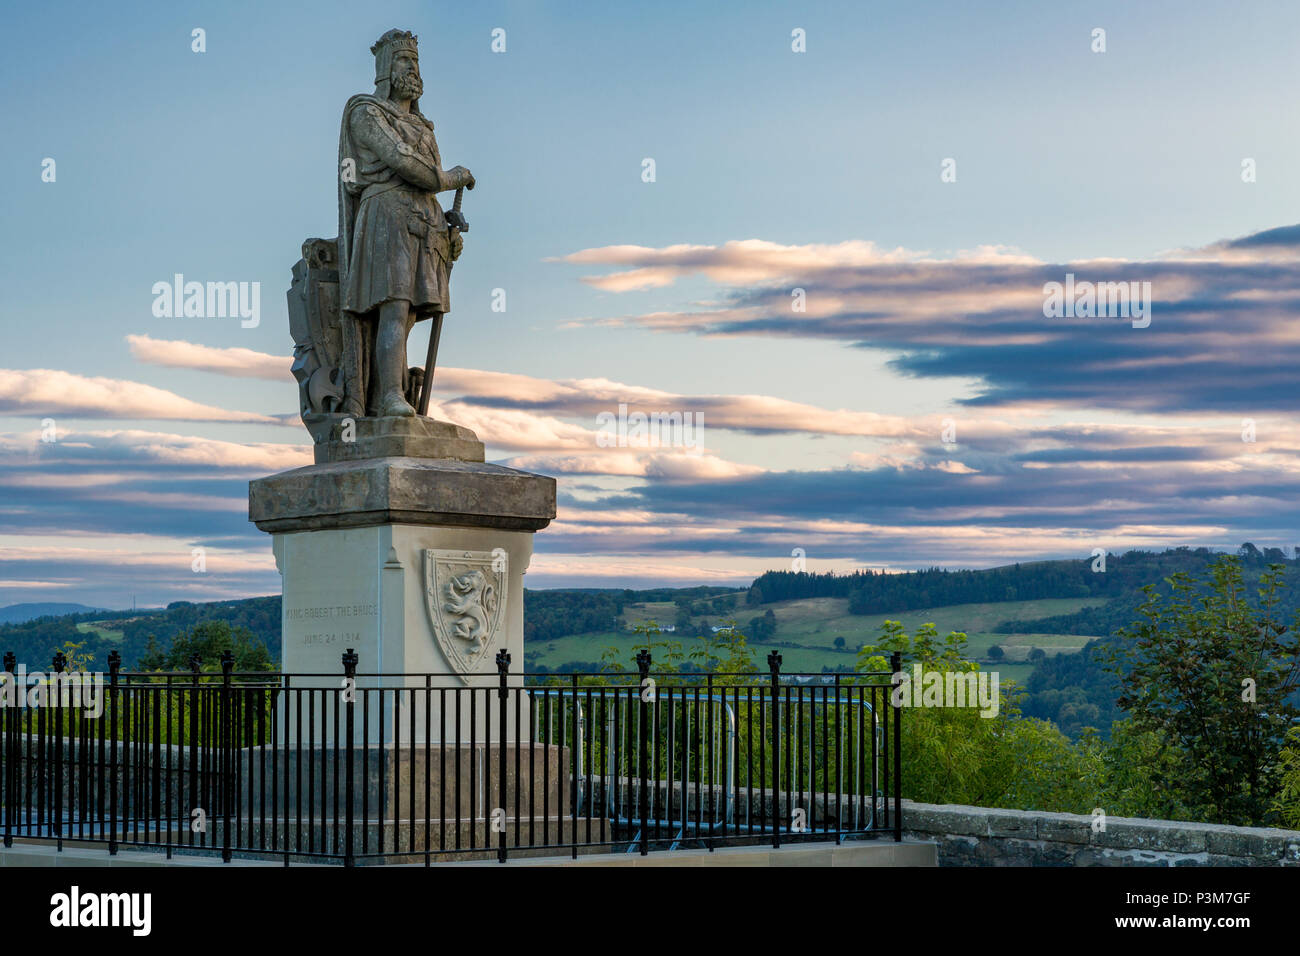 Dawn over Robert the Bruce statue at entrance to Stirling Castle, Stirling, Scotland, UK Stock Photo